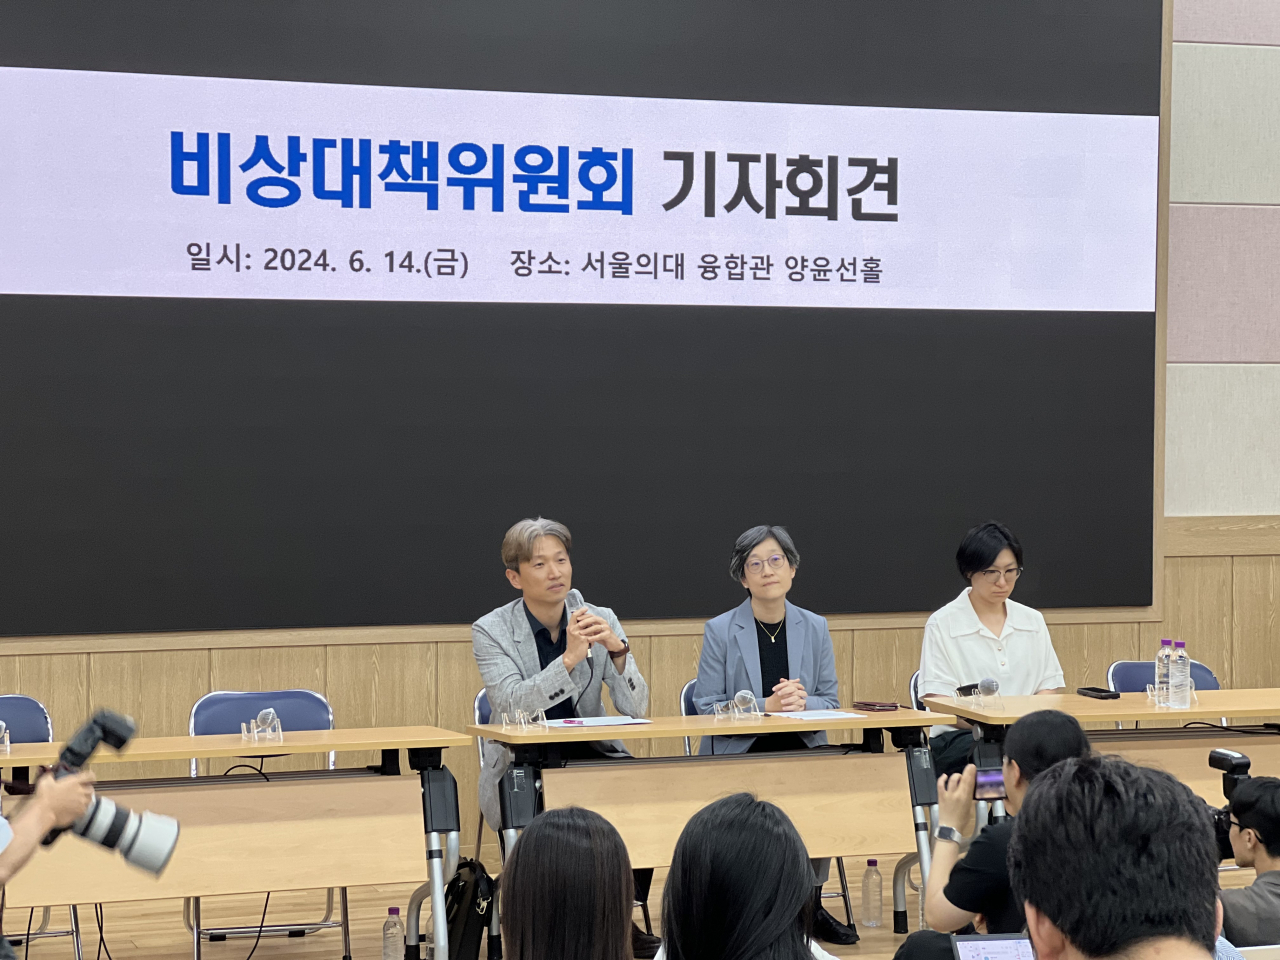 The emergency committee of medical professors at Seoul National University and Seoul National University Hospital speaks at a press conference on the school's campus on Friday. (Park Jun-hee/The Korea Herald)